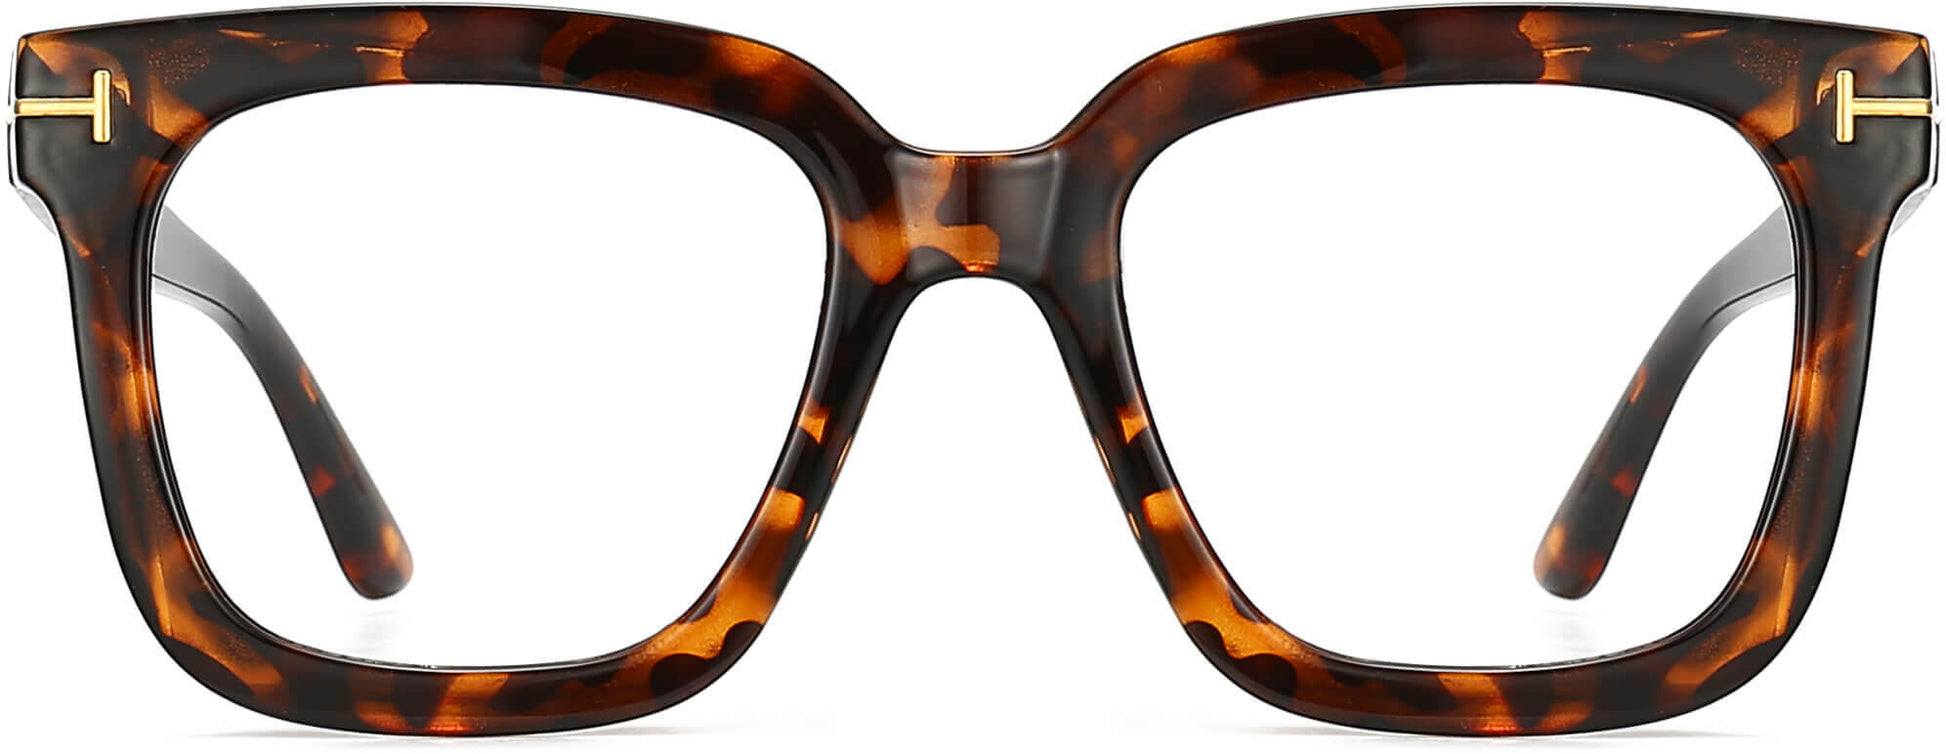 Caiden Square Tortoise Eyeglasses from ANRRI, front view